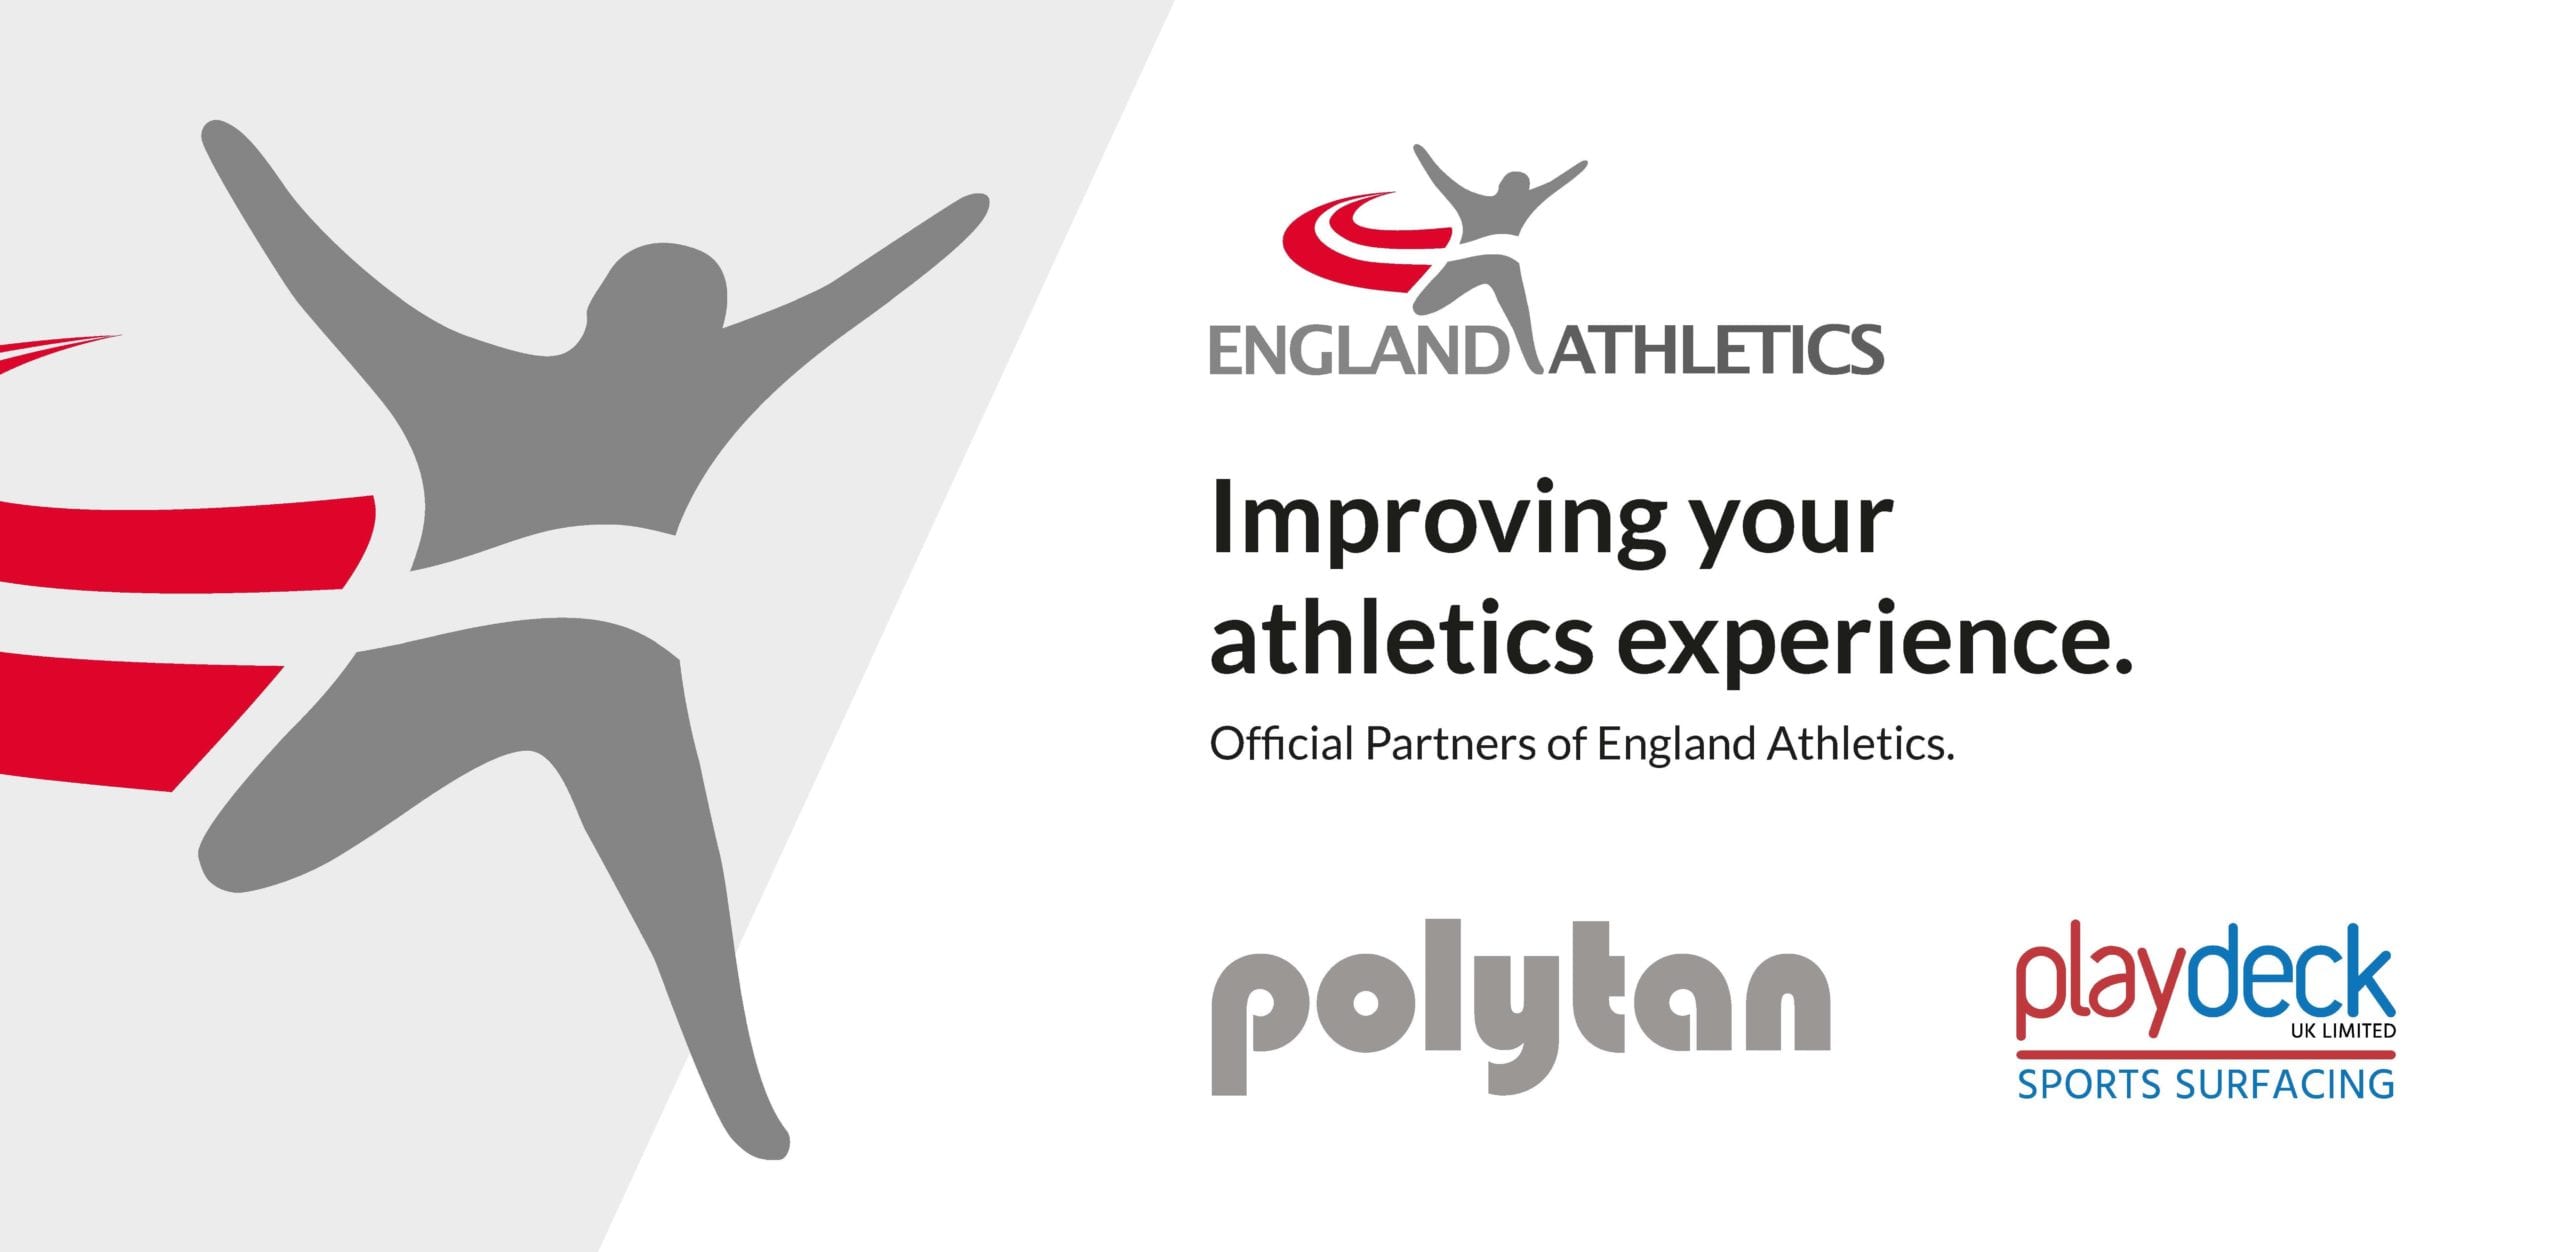 Official Partner of England Athletics